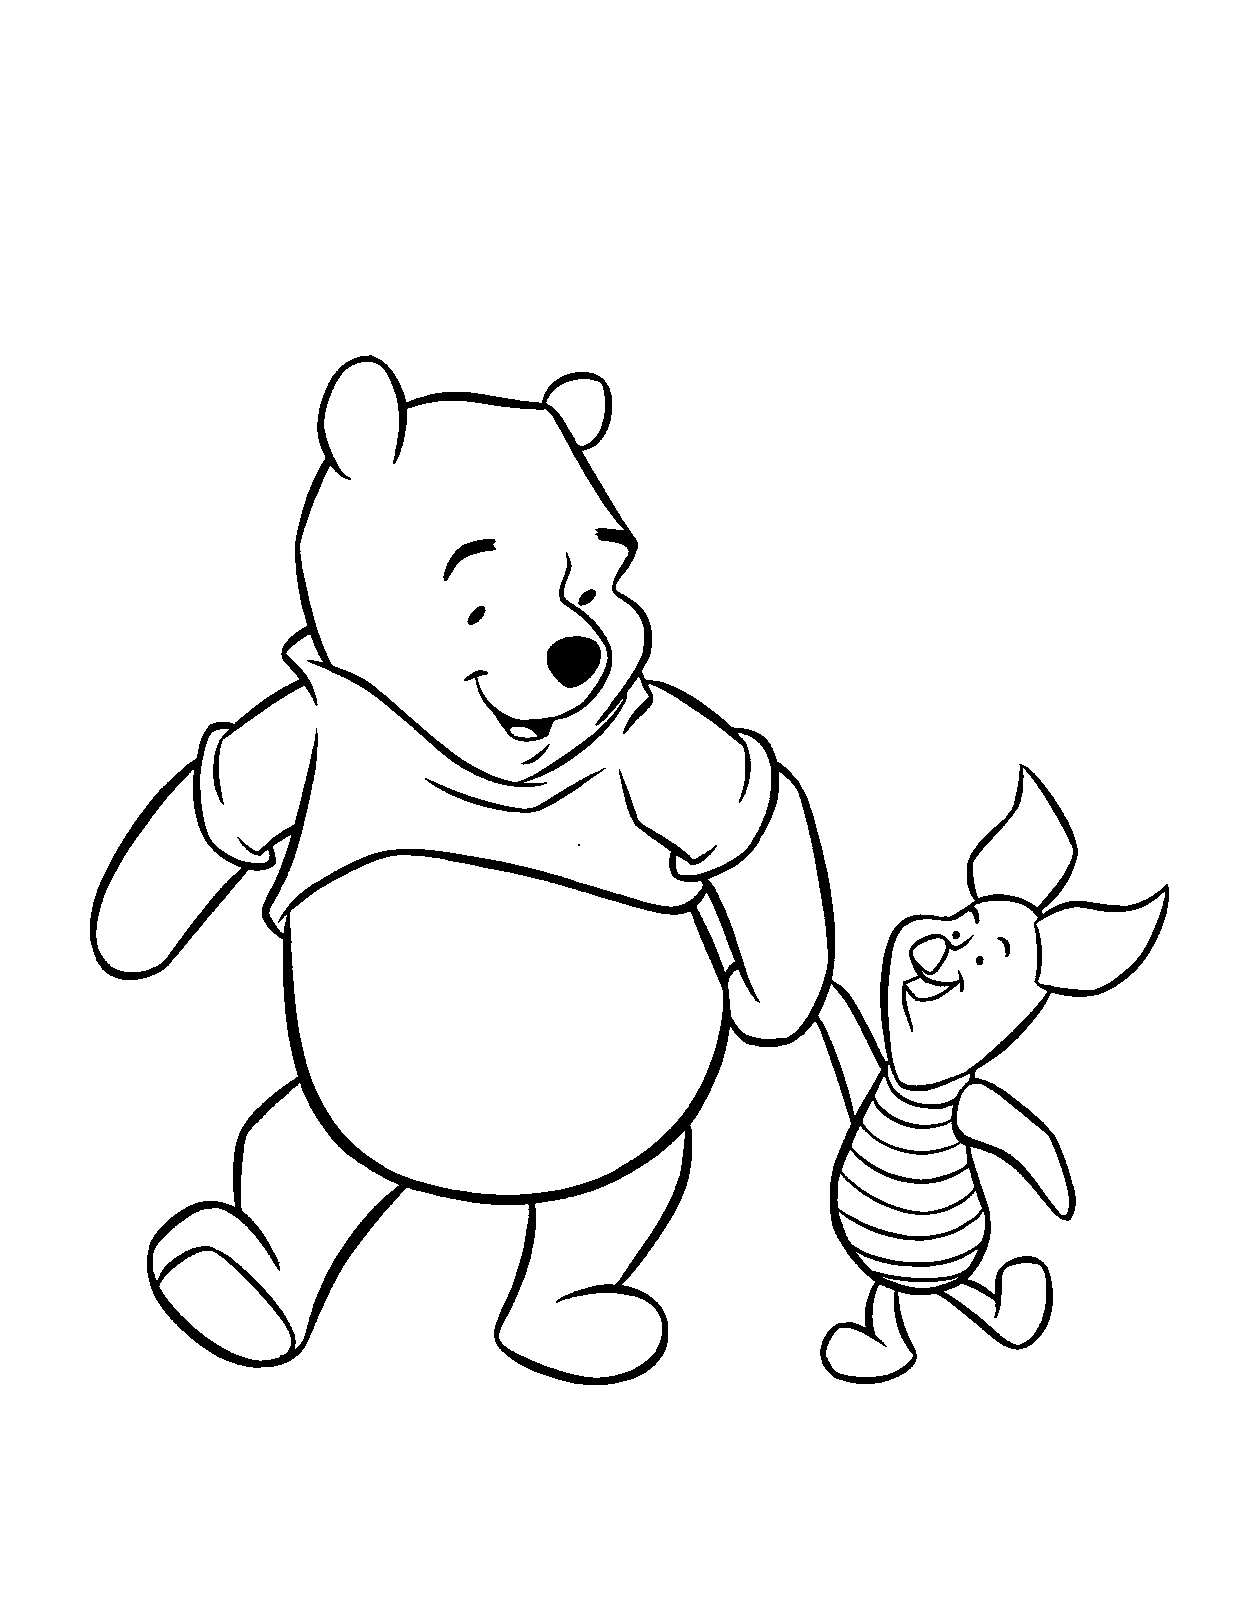 Winnie The Pooh Friendship With Piglet Pig S To Print